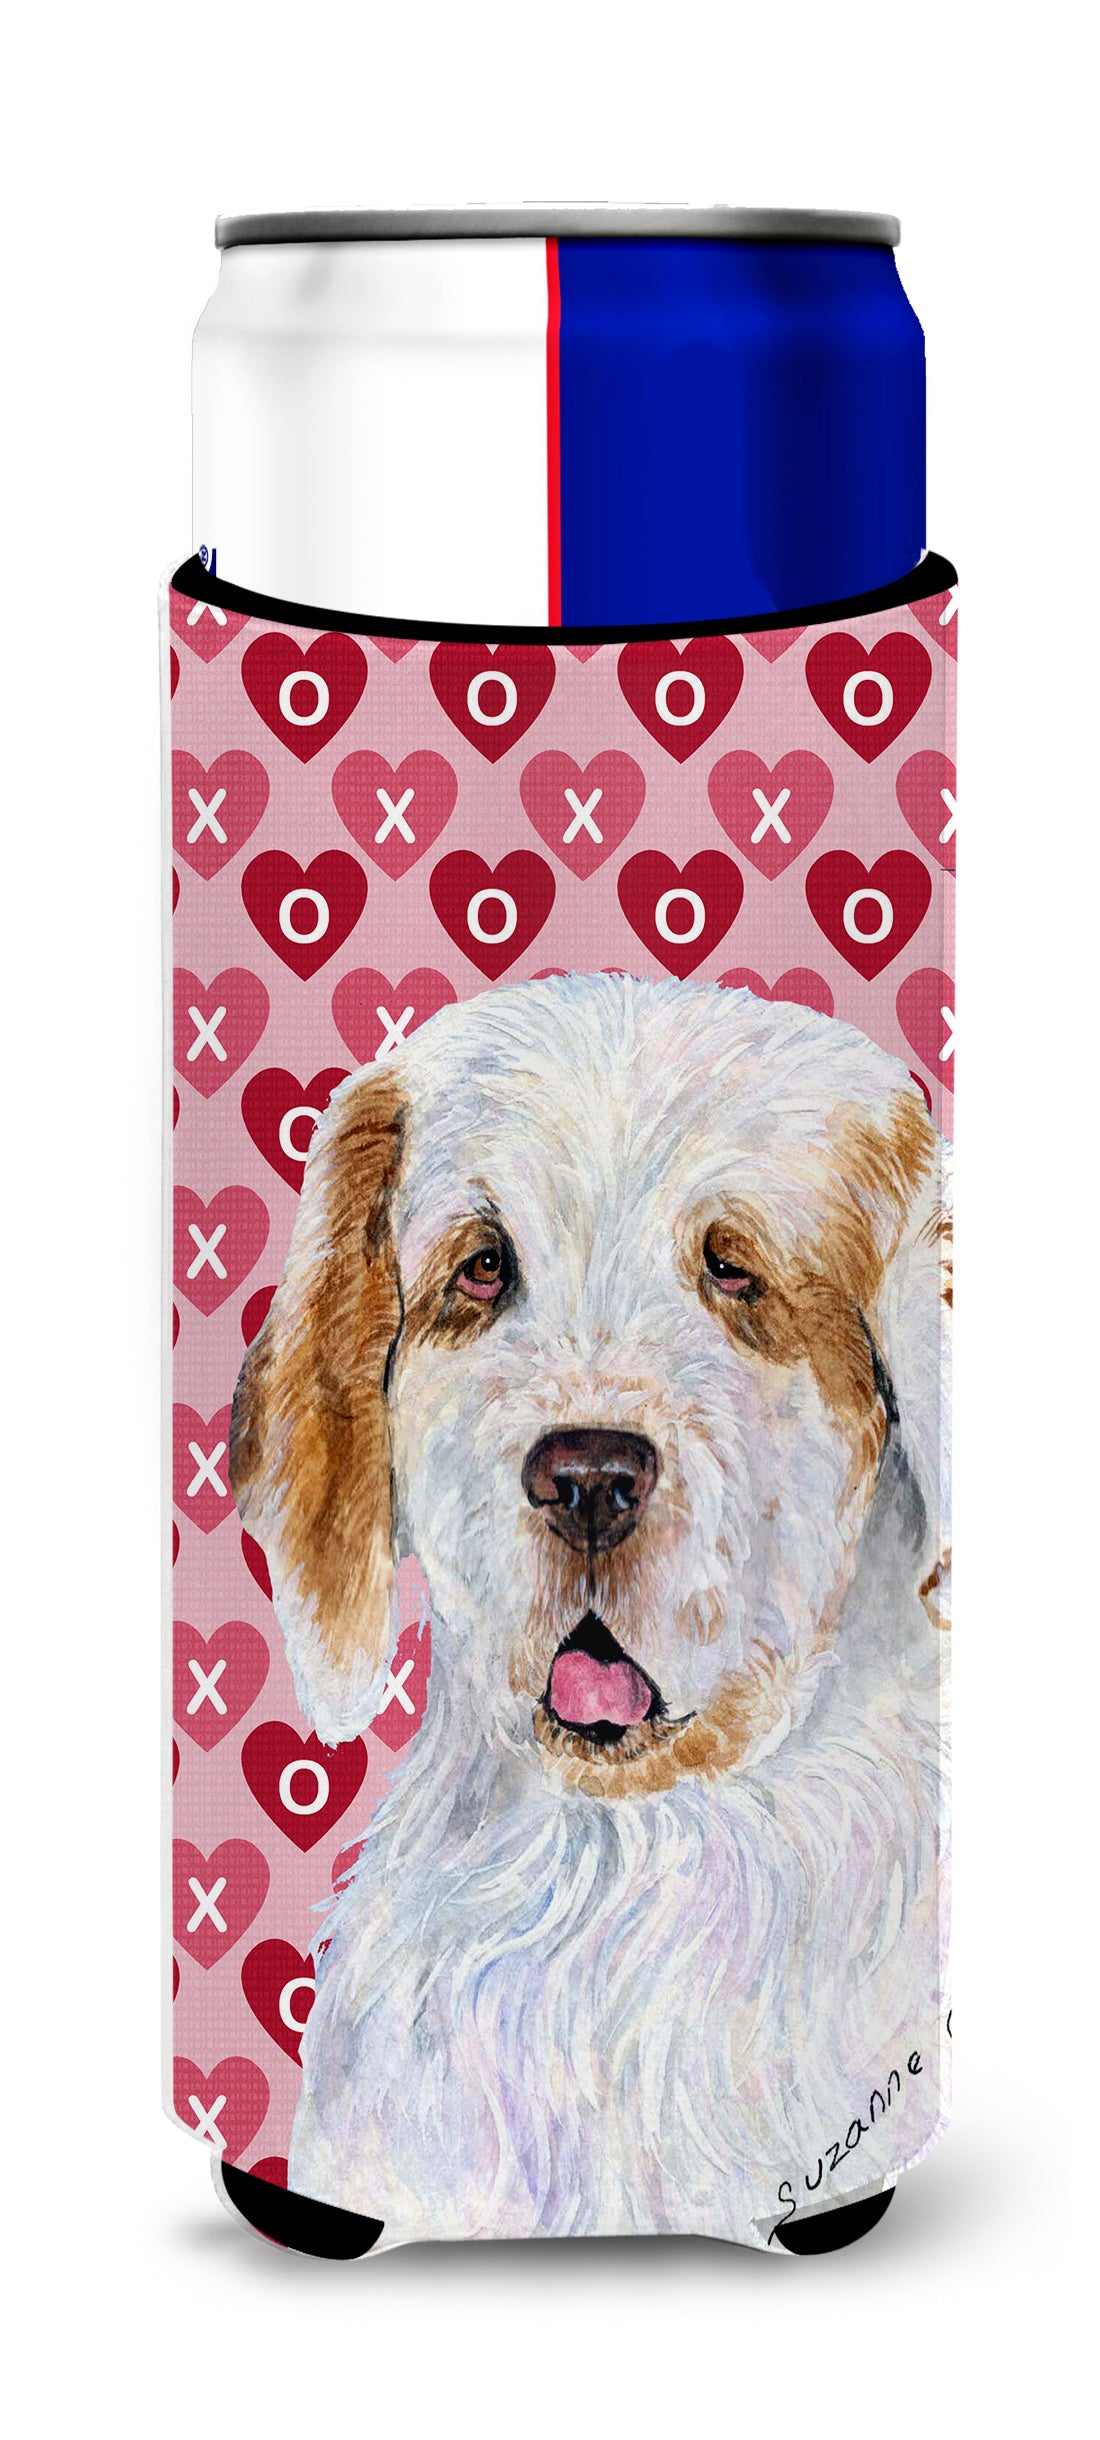 Clumber Spaniel Hearts Love and Valentine's Day Portrait Ultra Beverage Insulators for slim cans SS4500MUK.